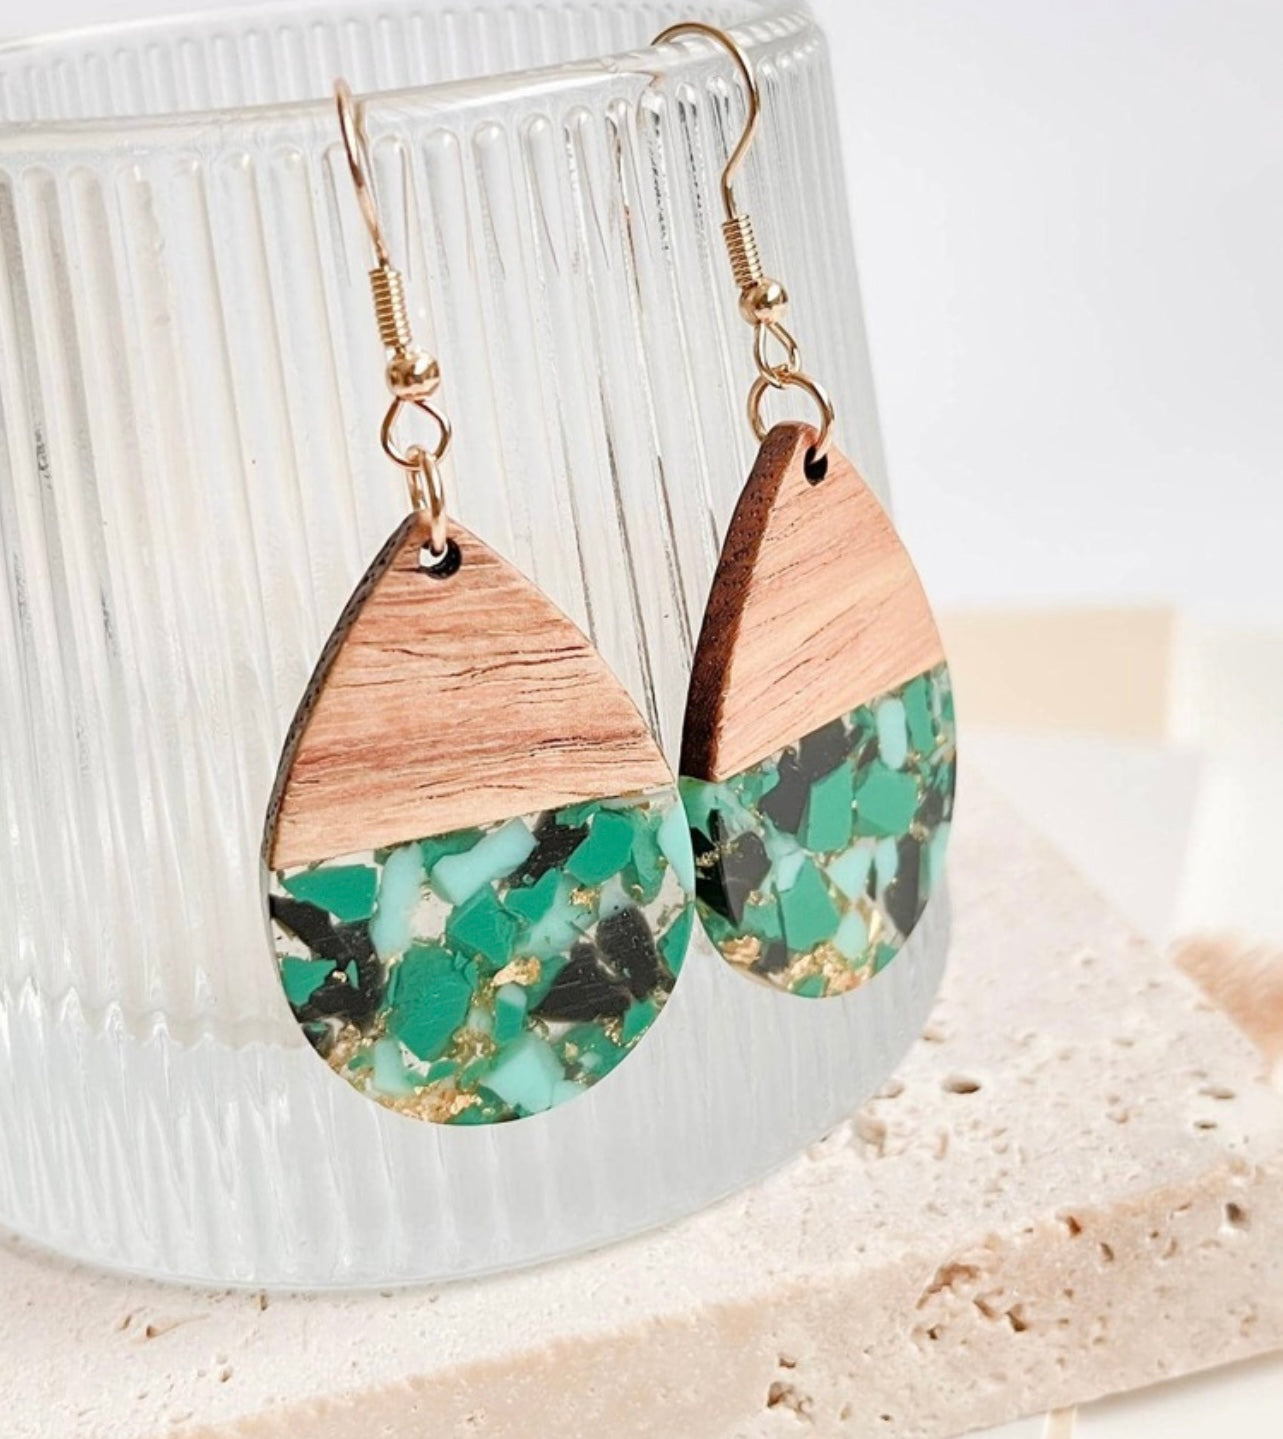 Beautiful Wood and Resin Mint and Black Earrings